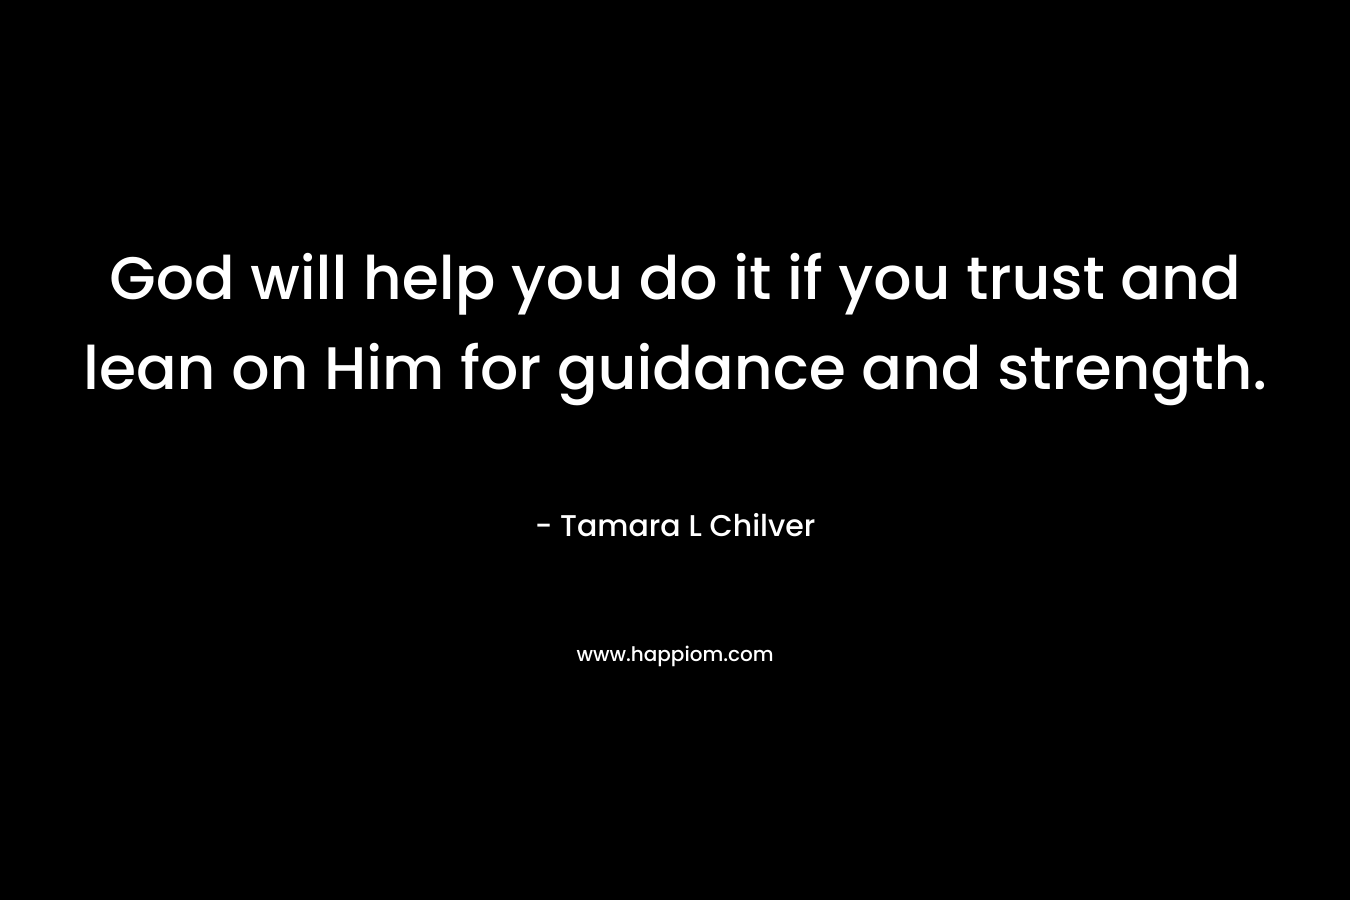 God will help you do it if you trust and lean on Him for guidance and strength. – Tamara L Chilver